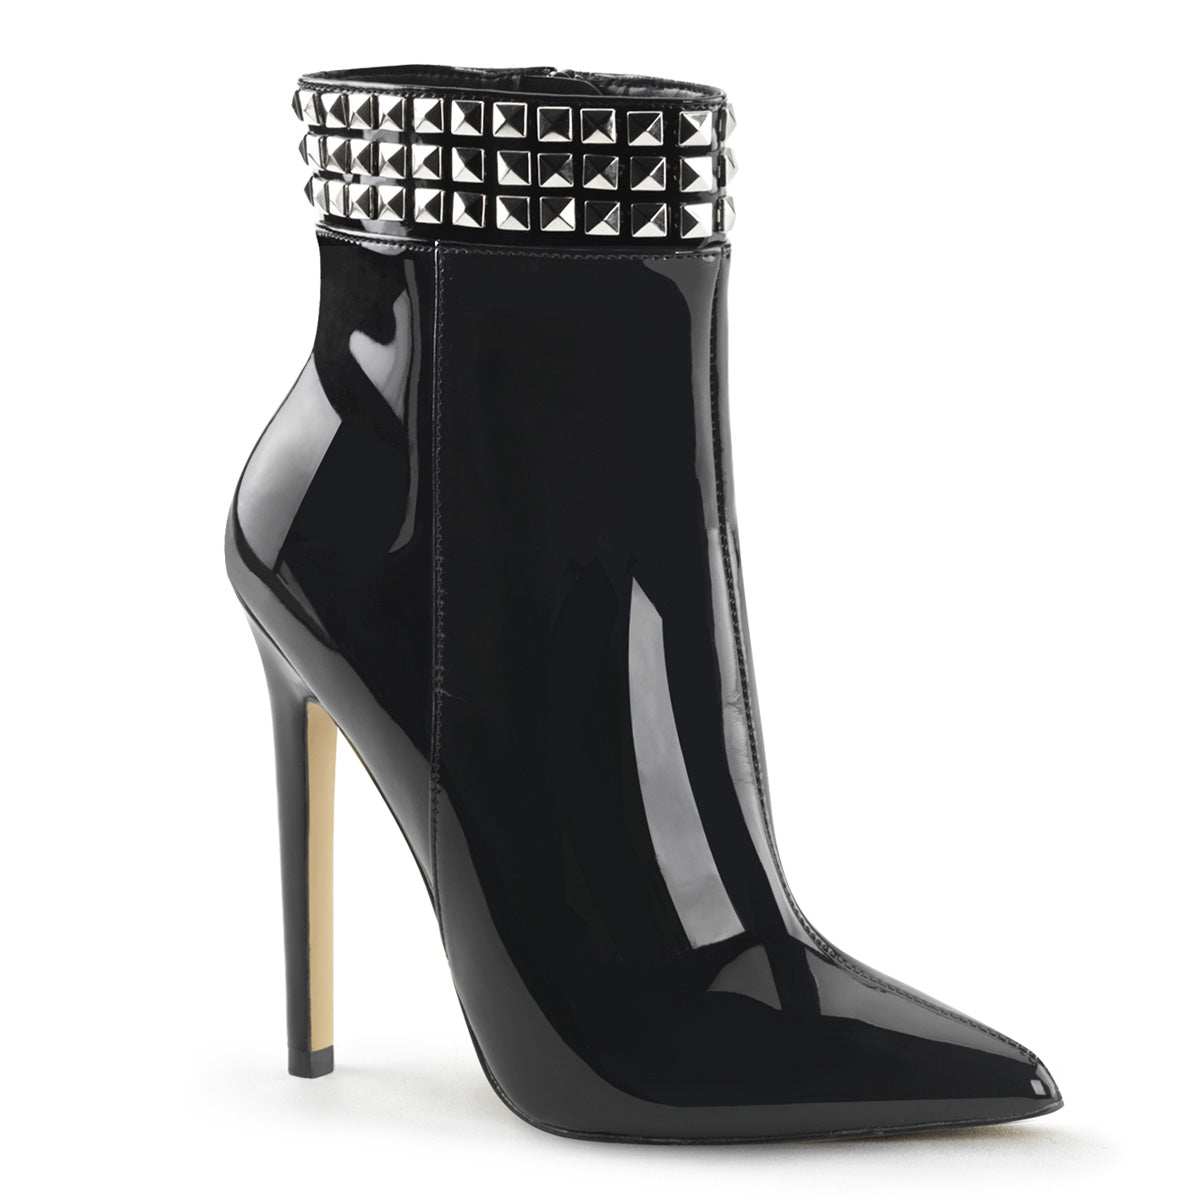 SEXY-1006 Ankle Boots 5" Heel Black Patent Fetish Footwear